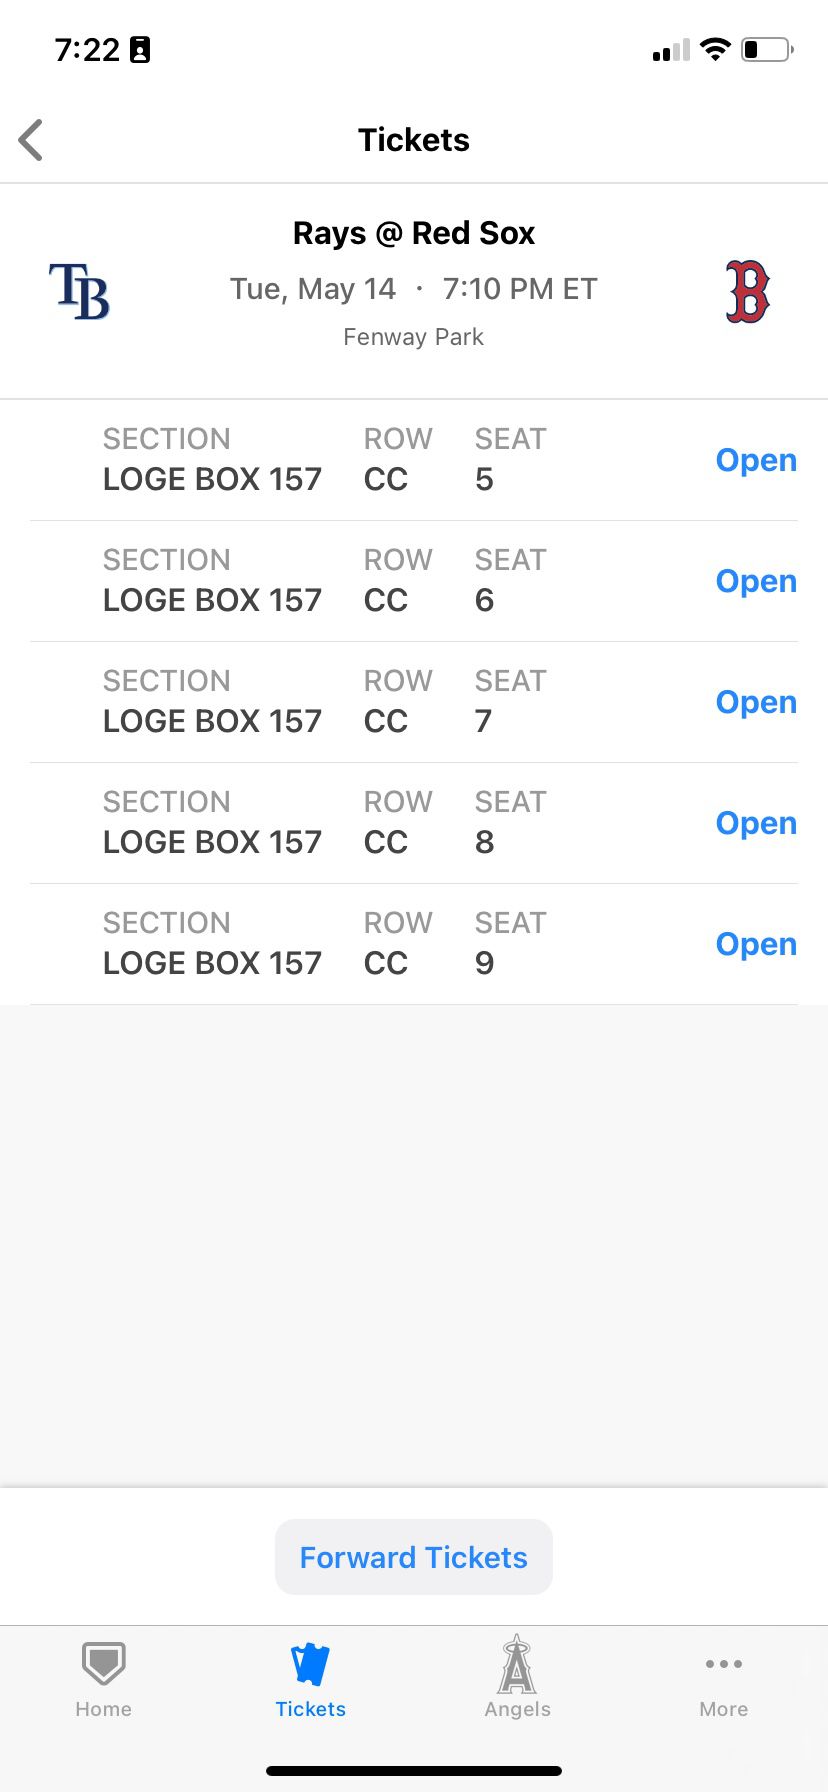 Make An Offer! Boston Red Sox Tickets - Tuesday, May 14